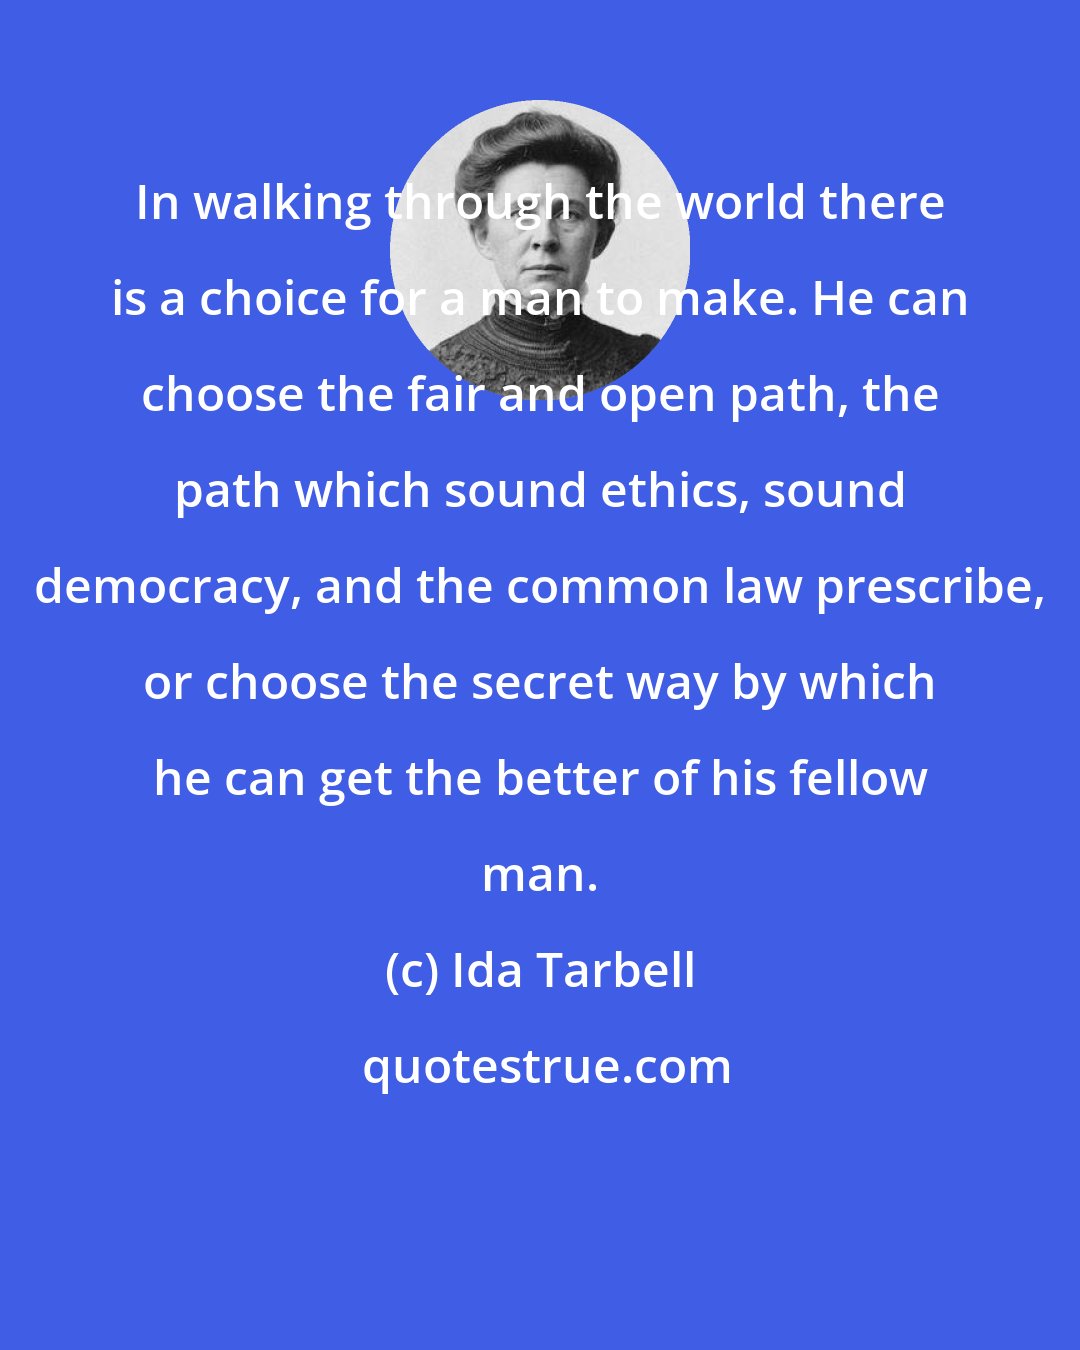 Ida Tarbell: In walking through the world there is a choice for a man to make. He can choose the fair and open path, the path which sound ethics, sound democracy, and the common law prescribe, or choose the secret way by which he can get the better of his fellow man.